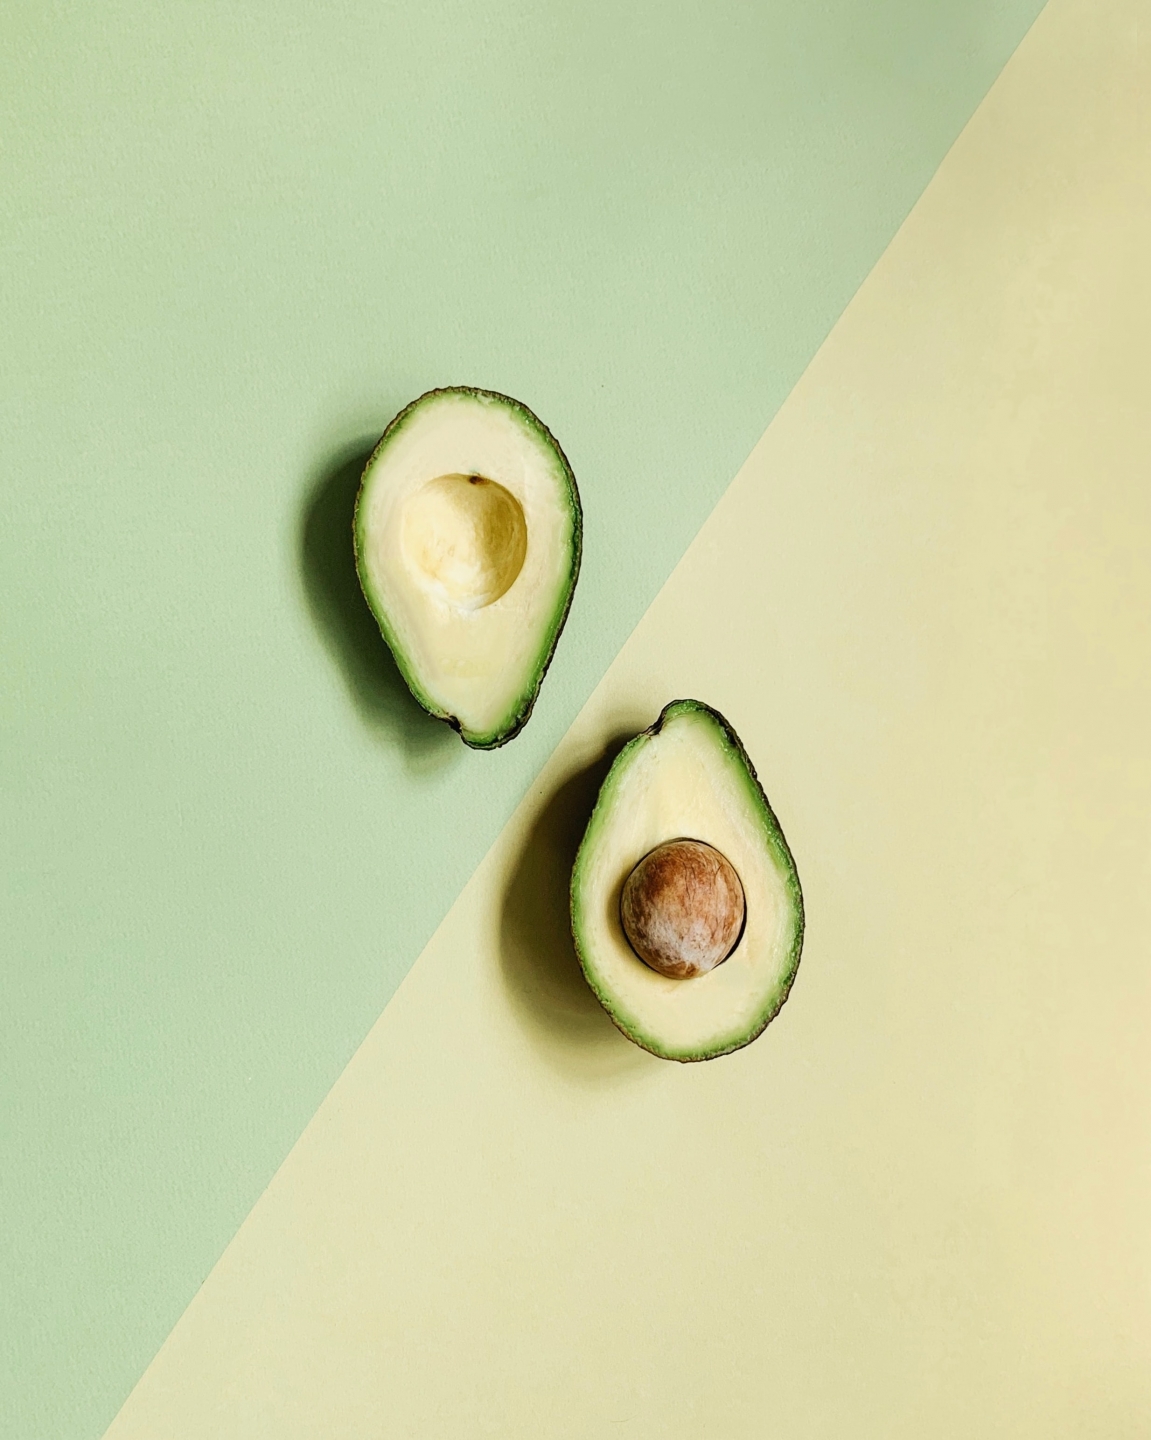 Avocado Oil Benefits: Health, Nutrition & Beauty Perks, According To Experts